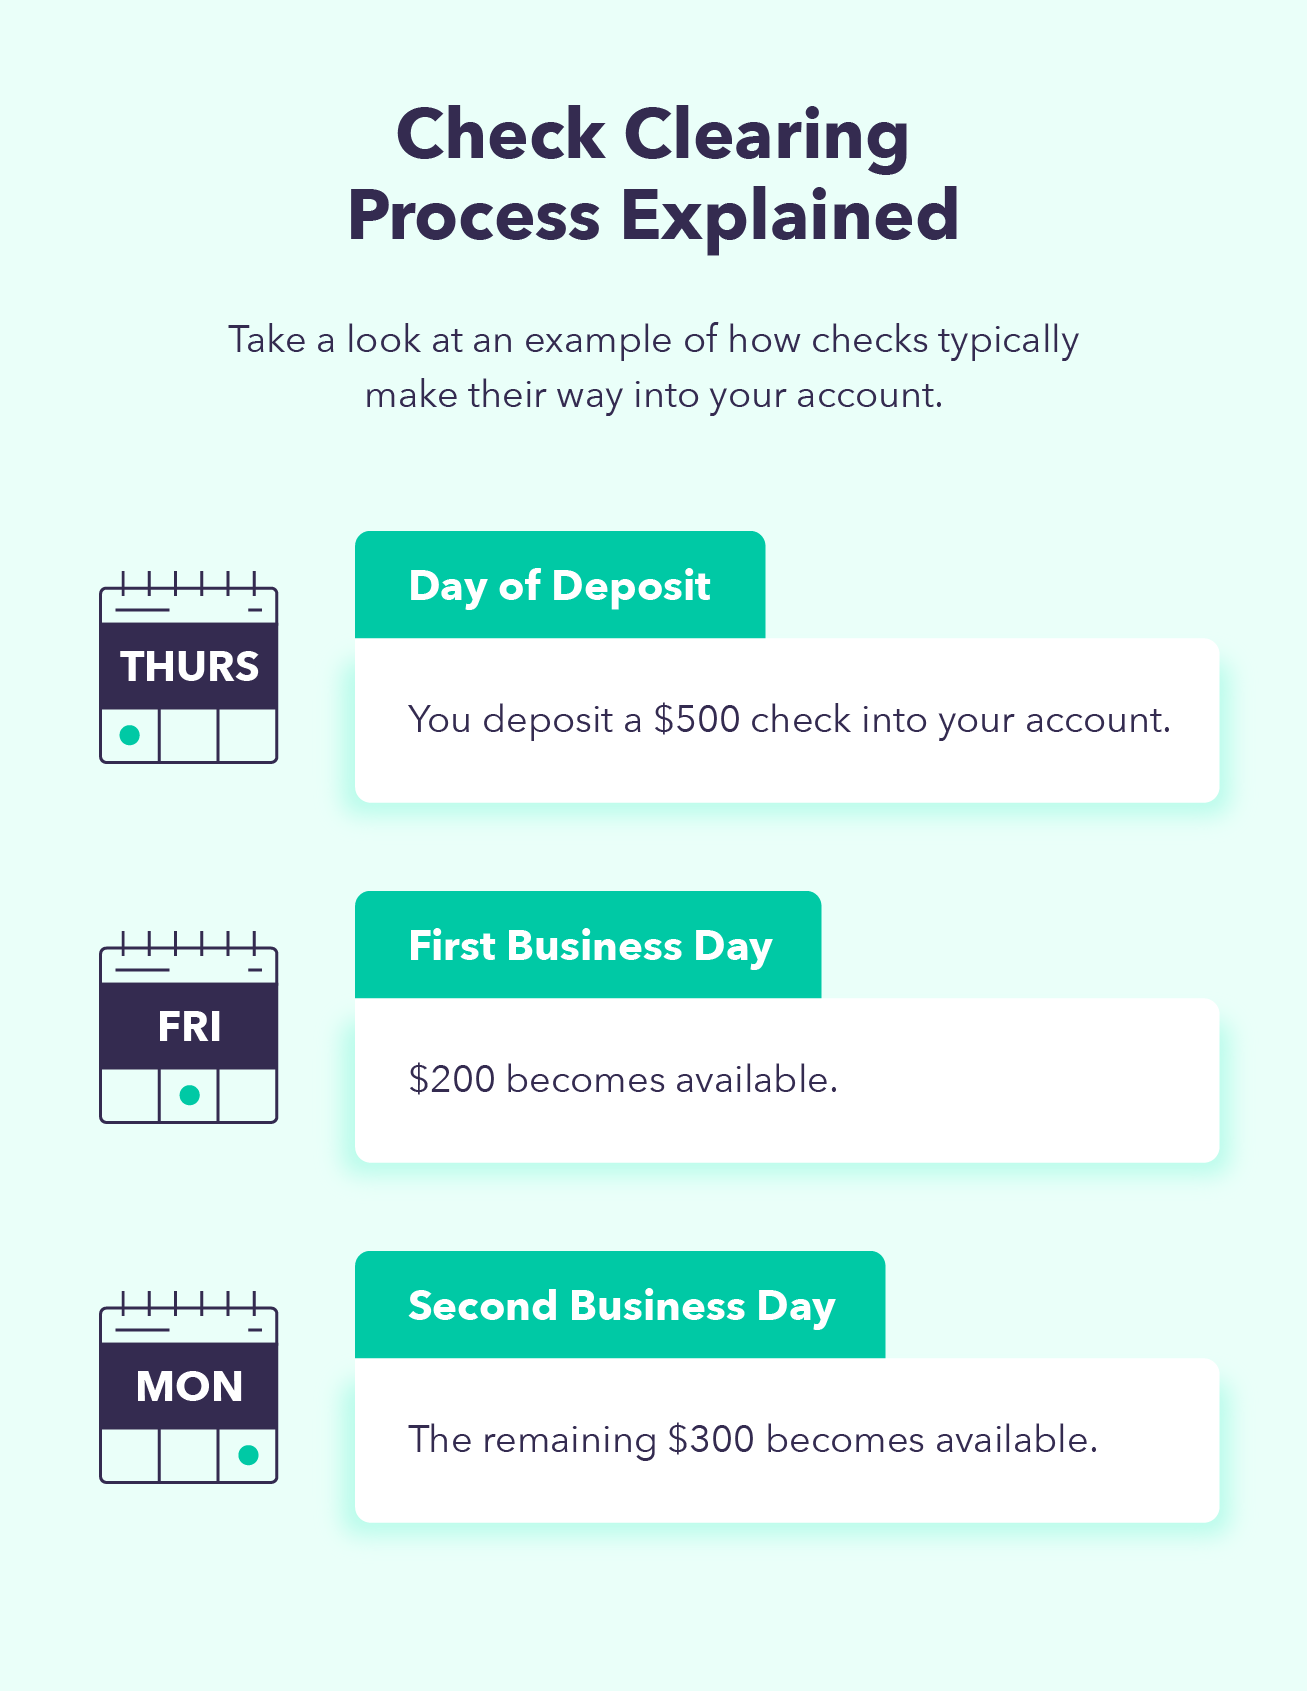 Three illustrations accompany a breakdown of the check clearing process, help to answer the question of “how long does it take for a check to clear?”